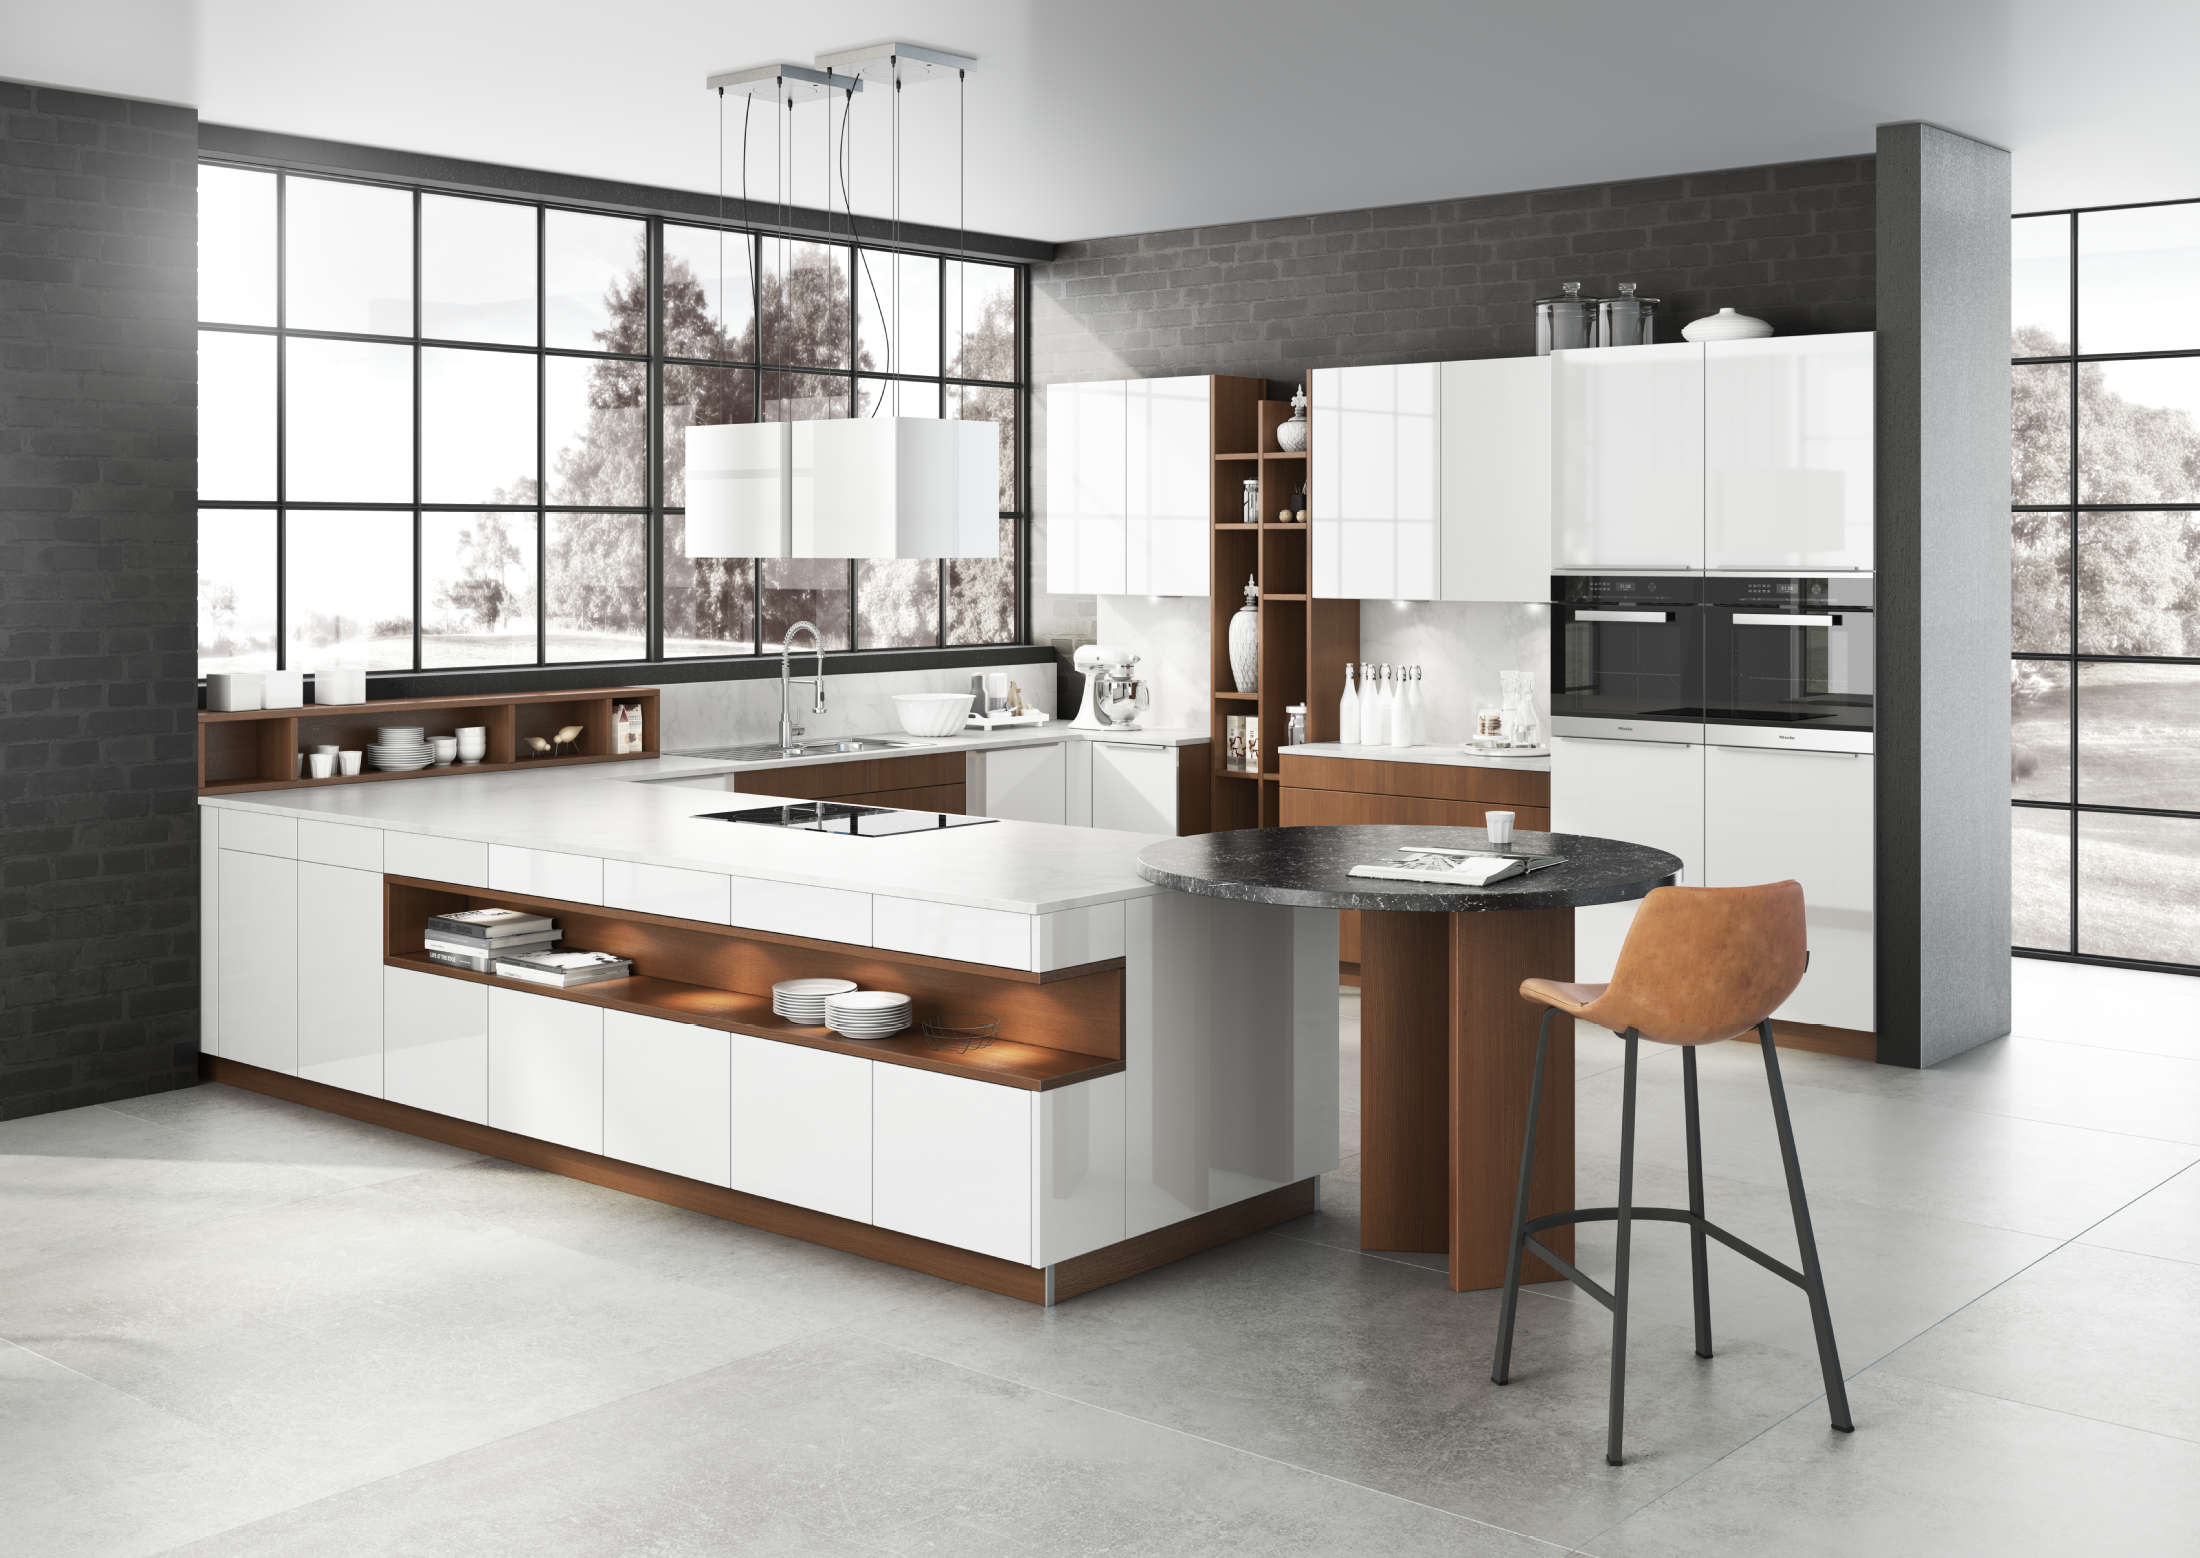 Shine Bright: Upgrade Your Home With European Style Modern High Gloss Cabinets